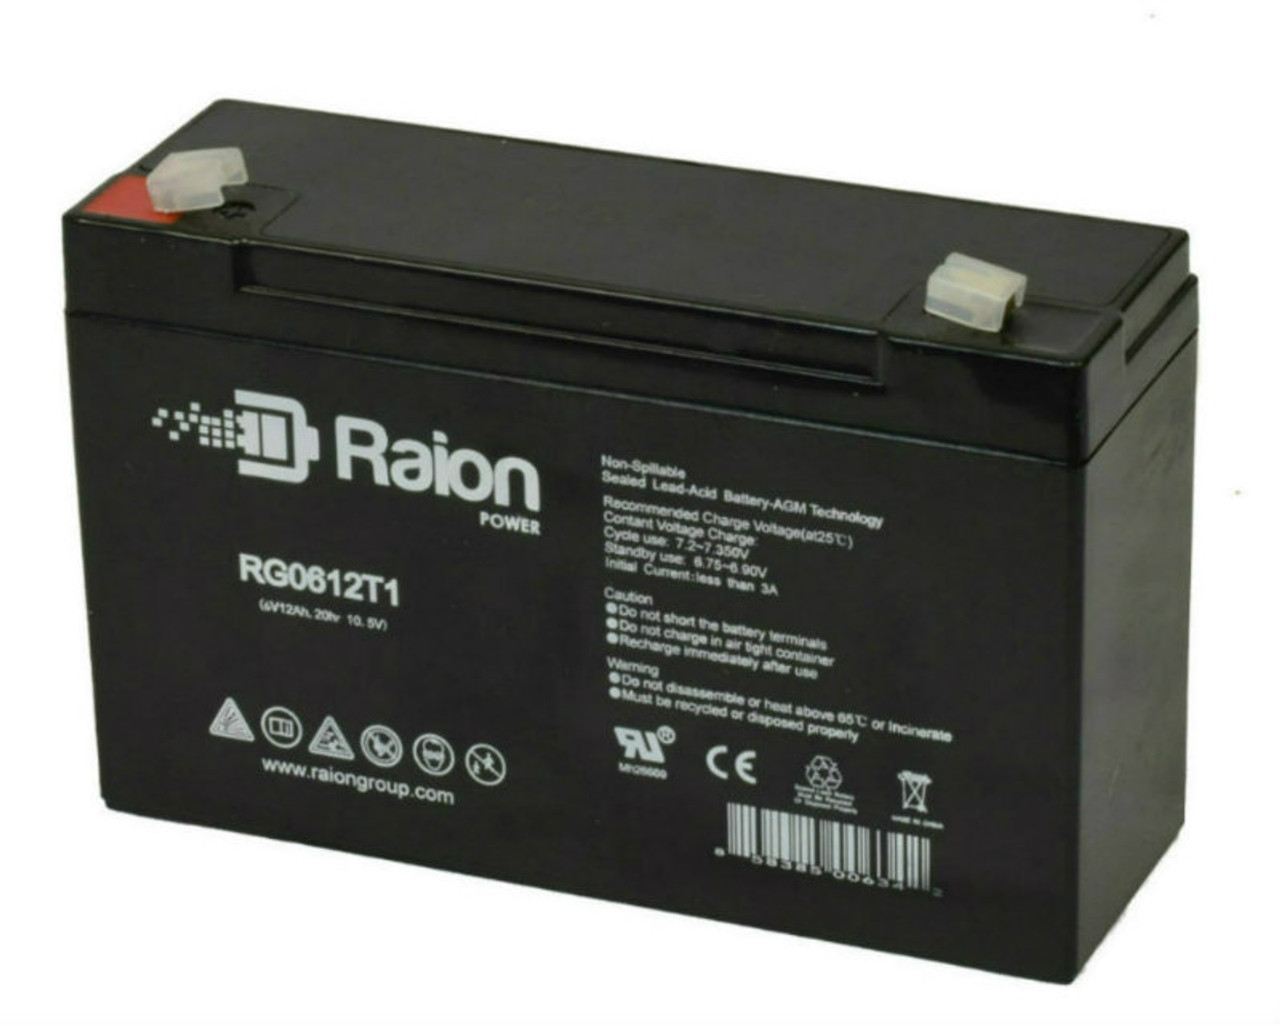 Raion Power RG06120T1 Replacement Battery for National Power GS032R2-F1